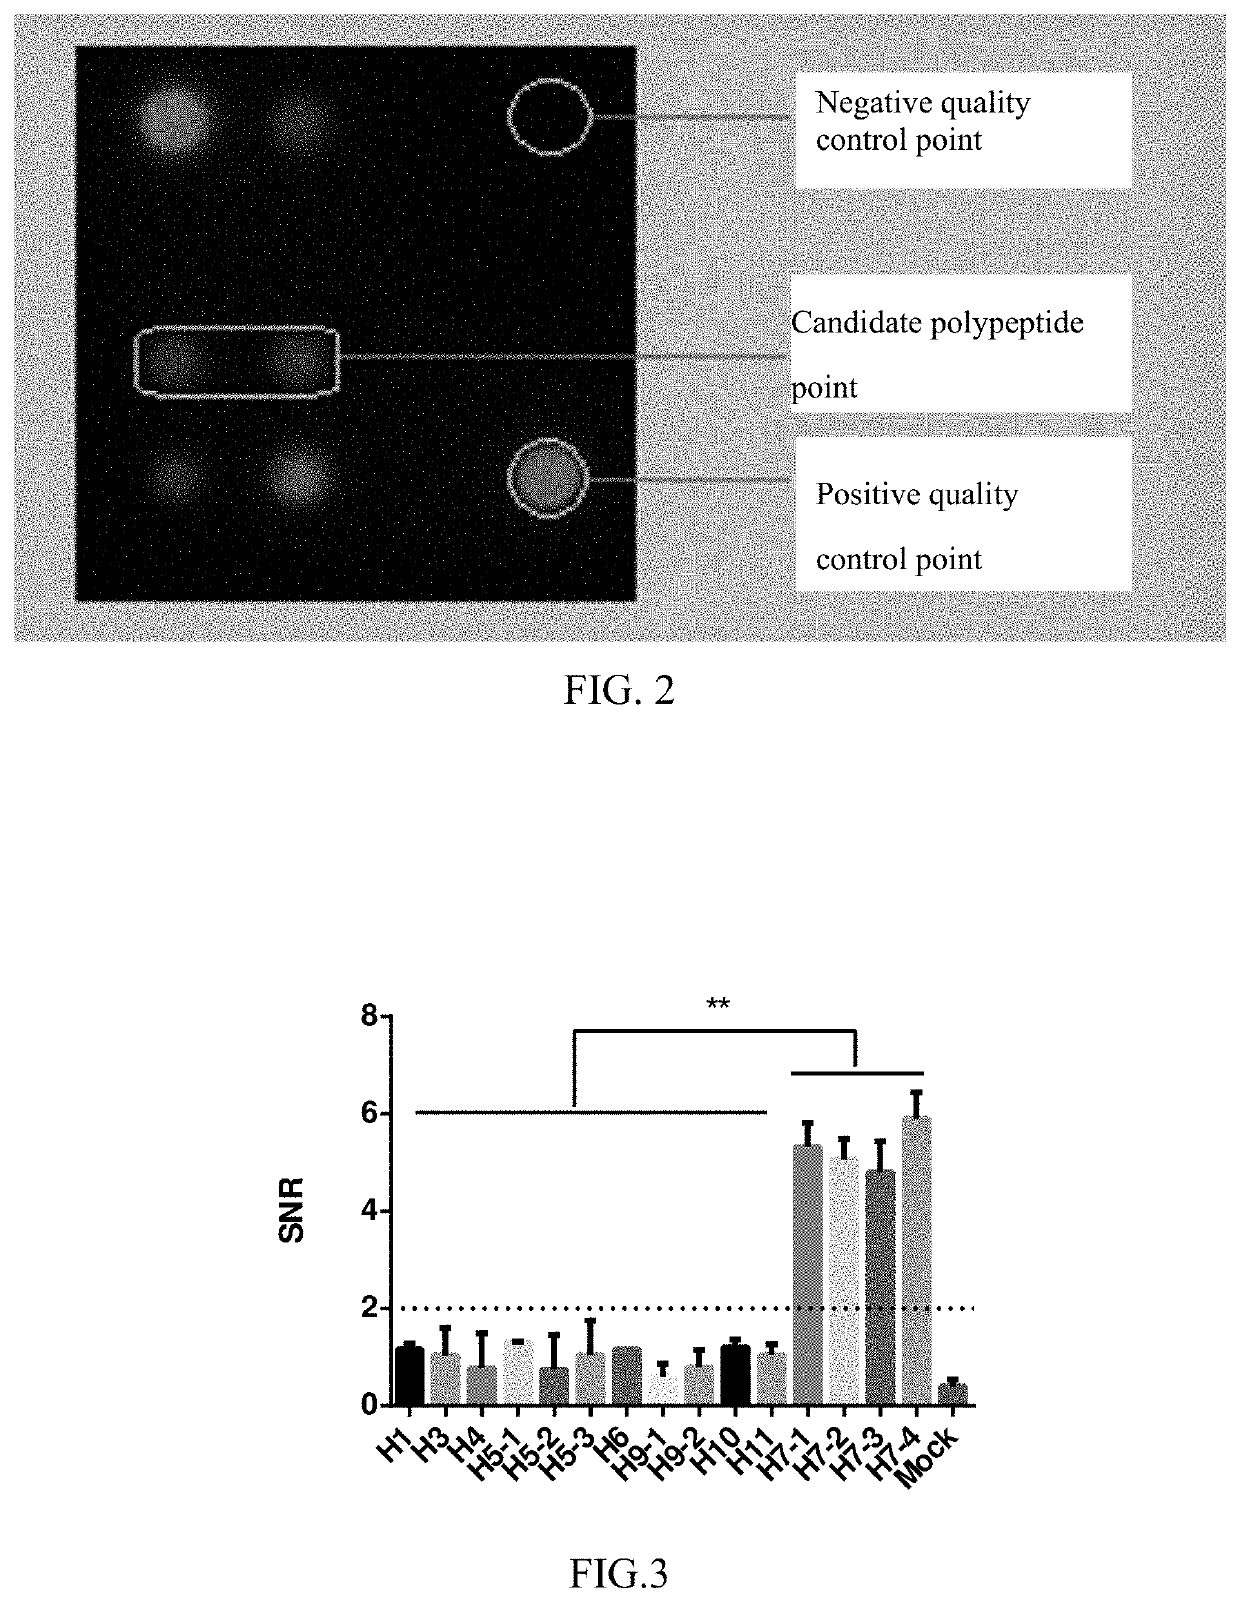 Recombinant h7n9 subtype avian influenza virus, inactivated marked vaccine and preparation method thereof